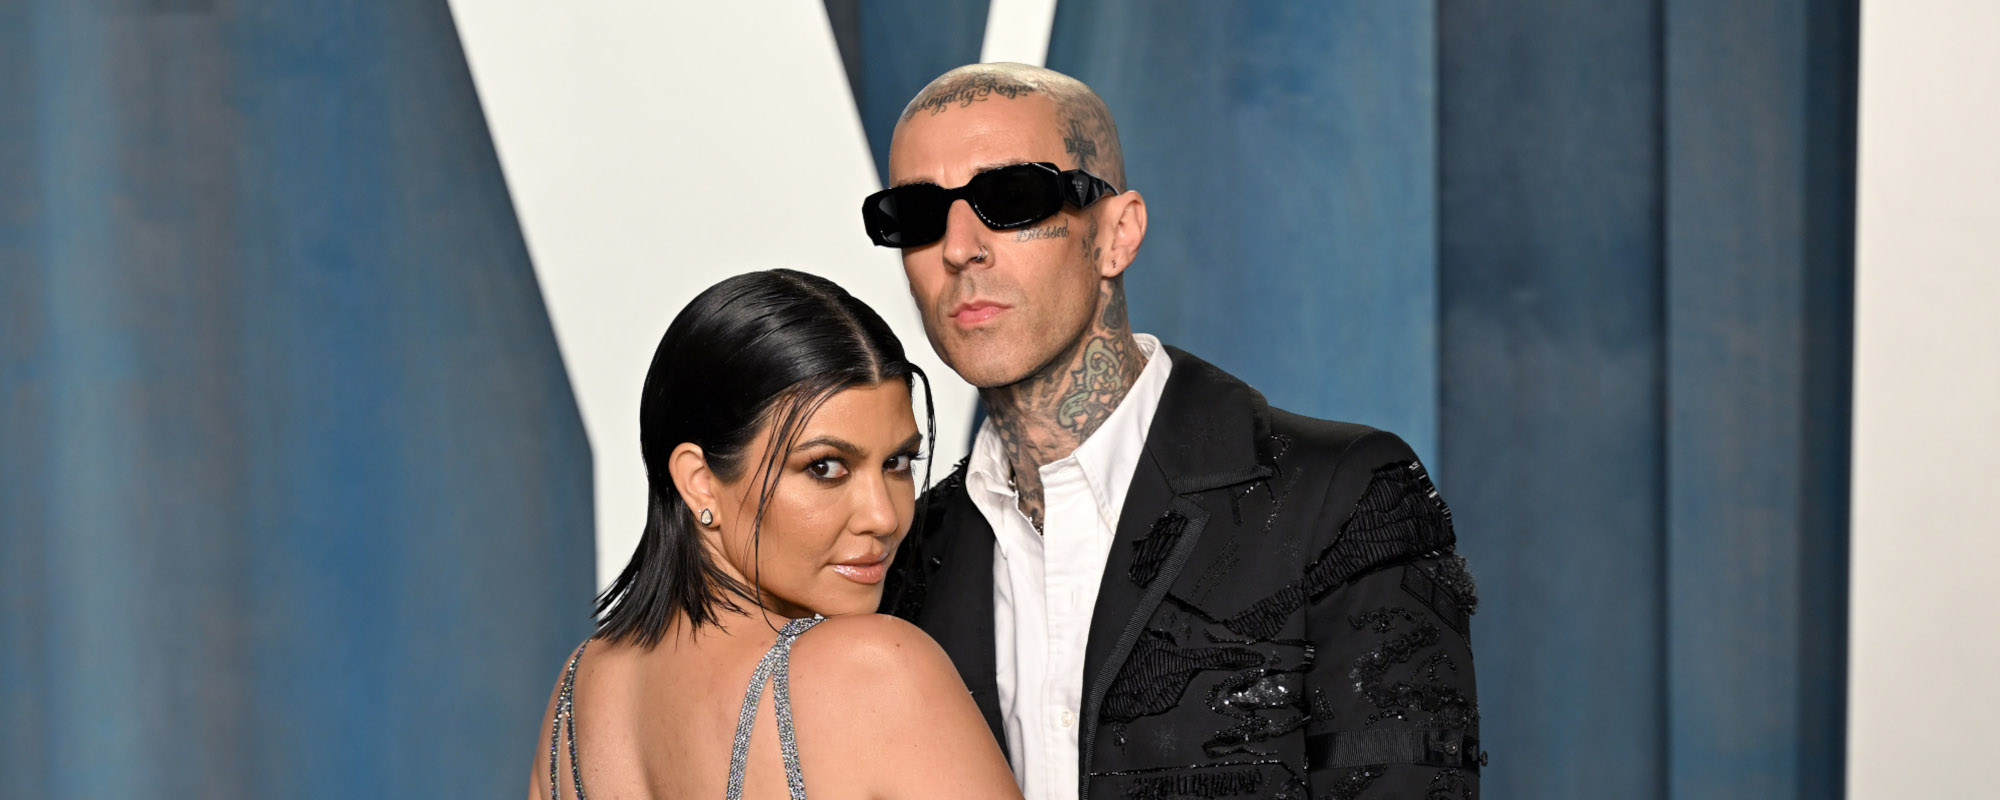 Travis Barker and Kourtney Kardashian Have Officially Tied the Knot